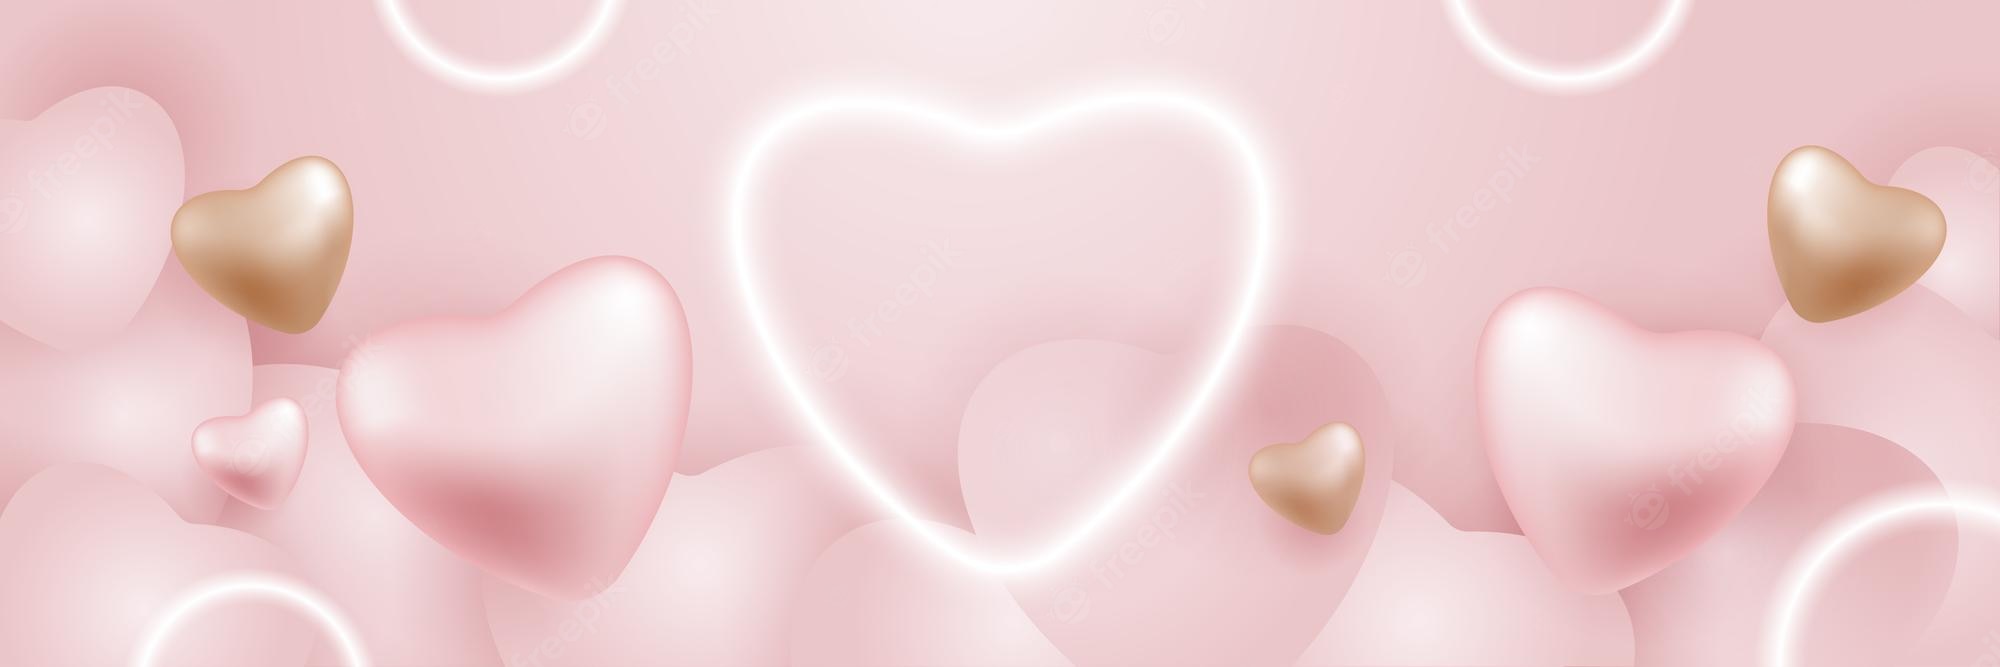 Premium Vector. Pink background with clouds 3D hearts and heart shaped aura